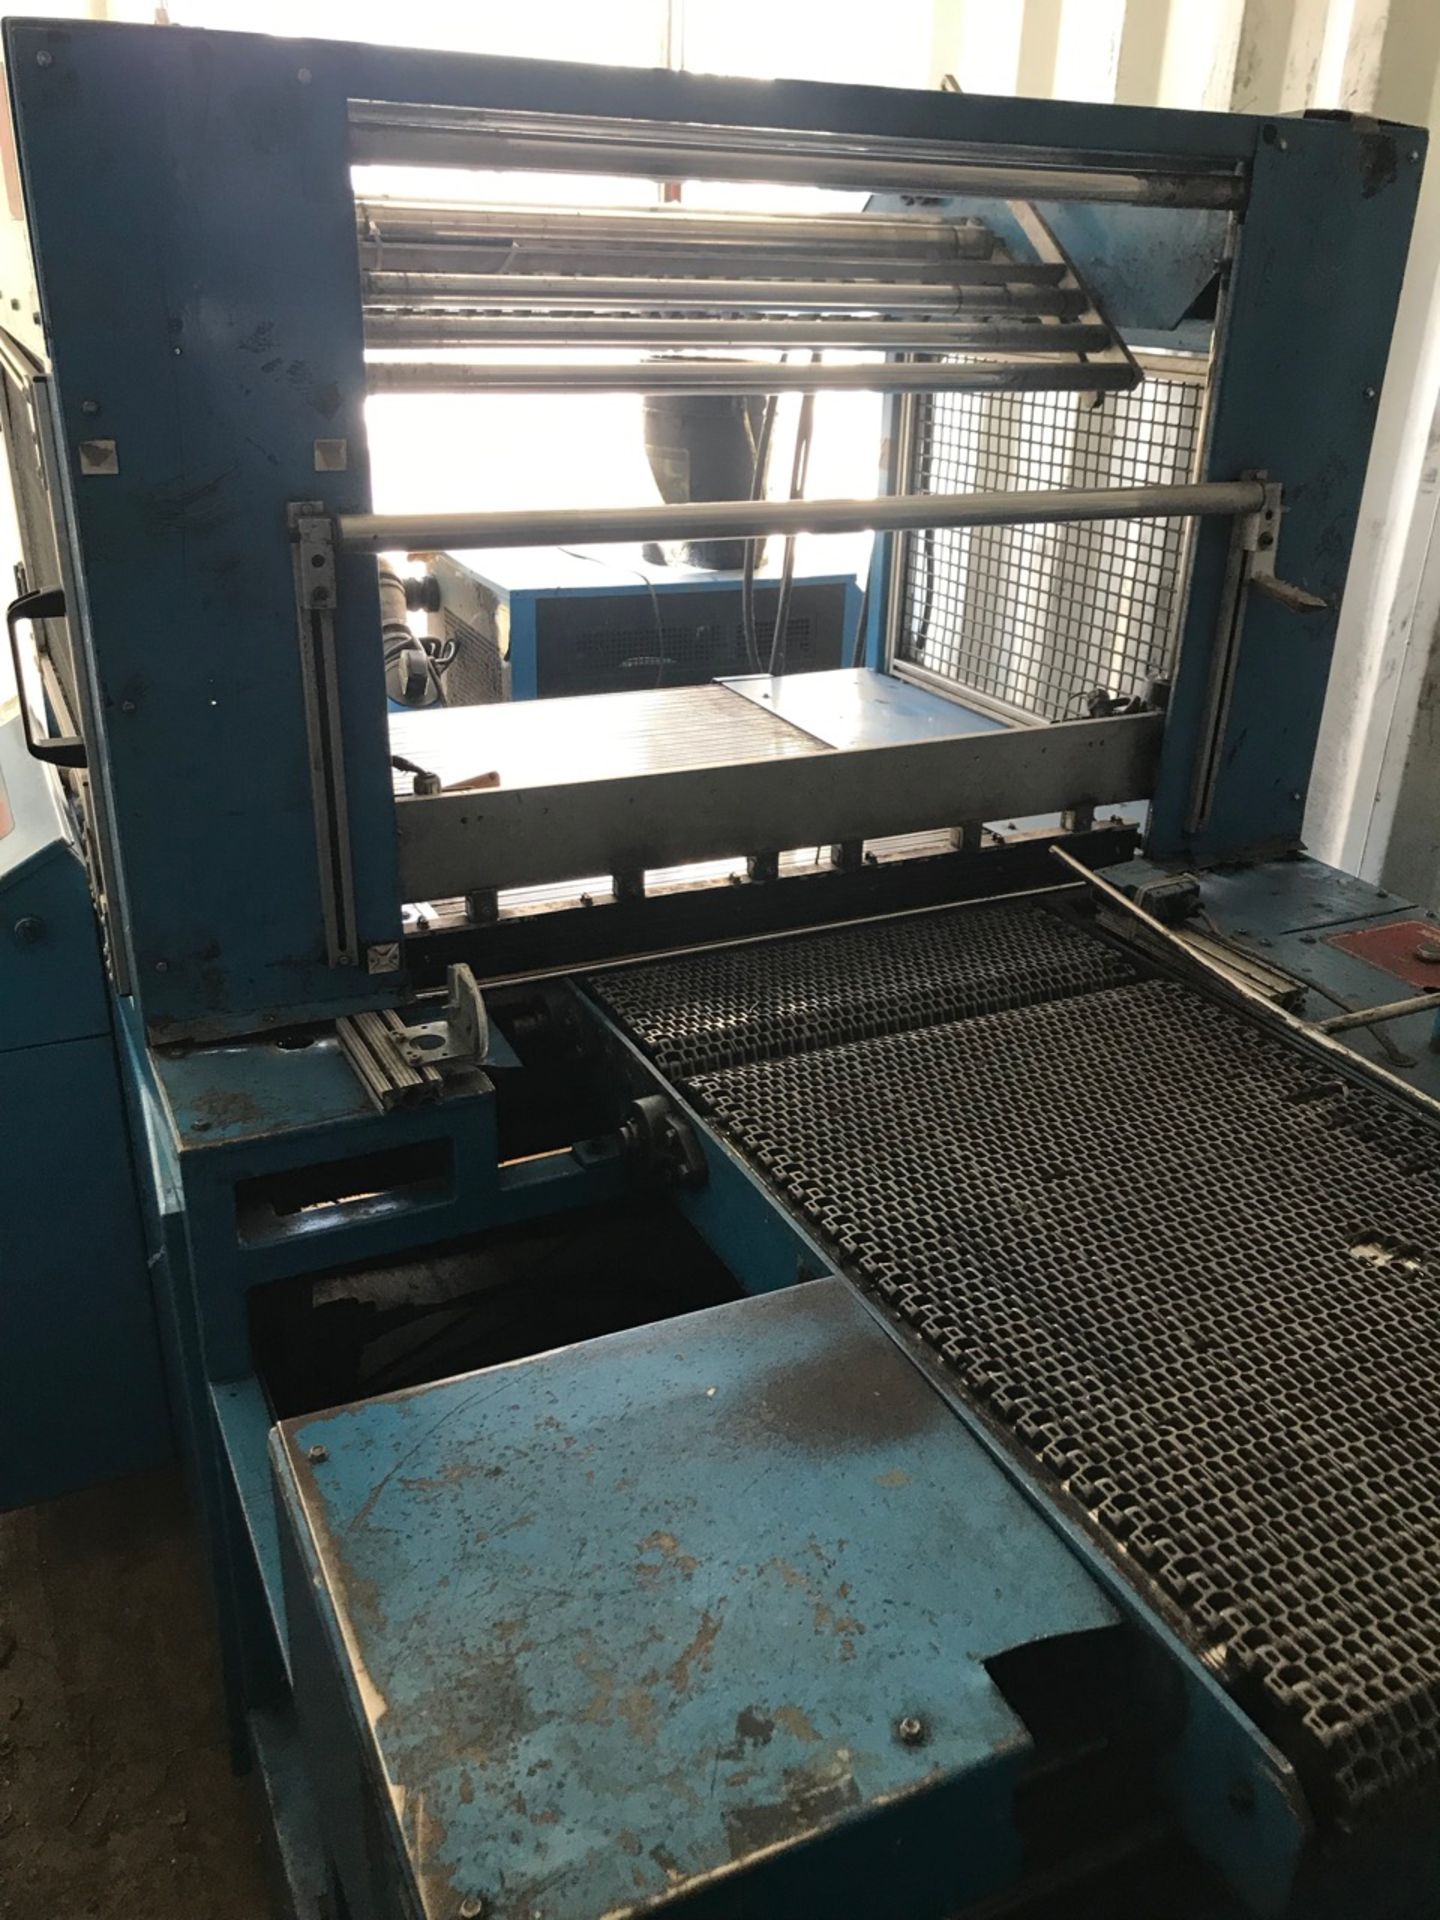 DAMARK SHRINK WRAPPING MACHINE MOD B34-90 (LOCATED IN CHATEAUGUAY, QC)